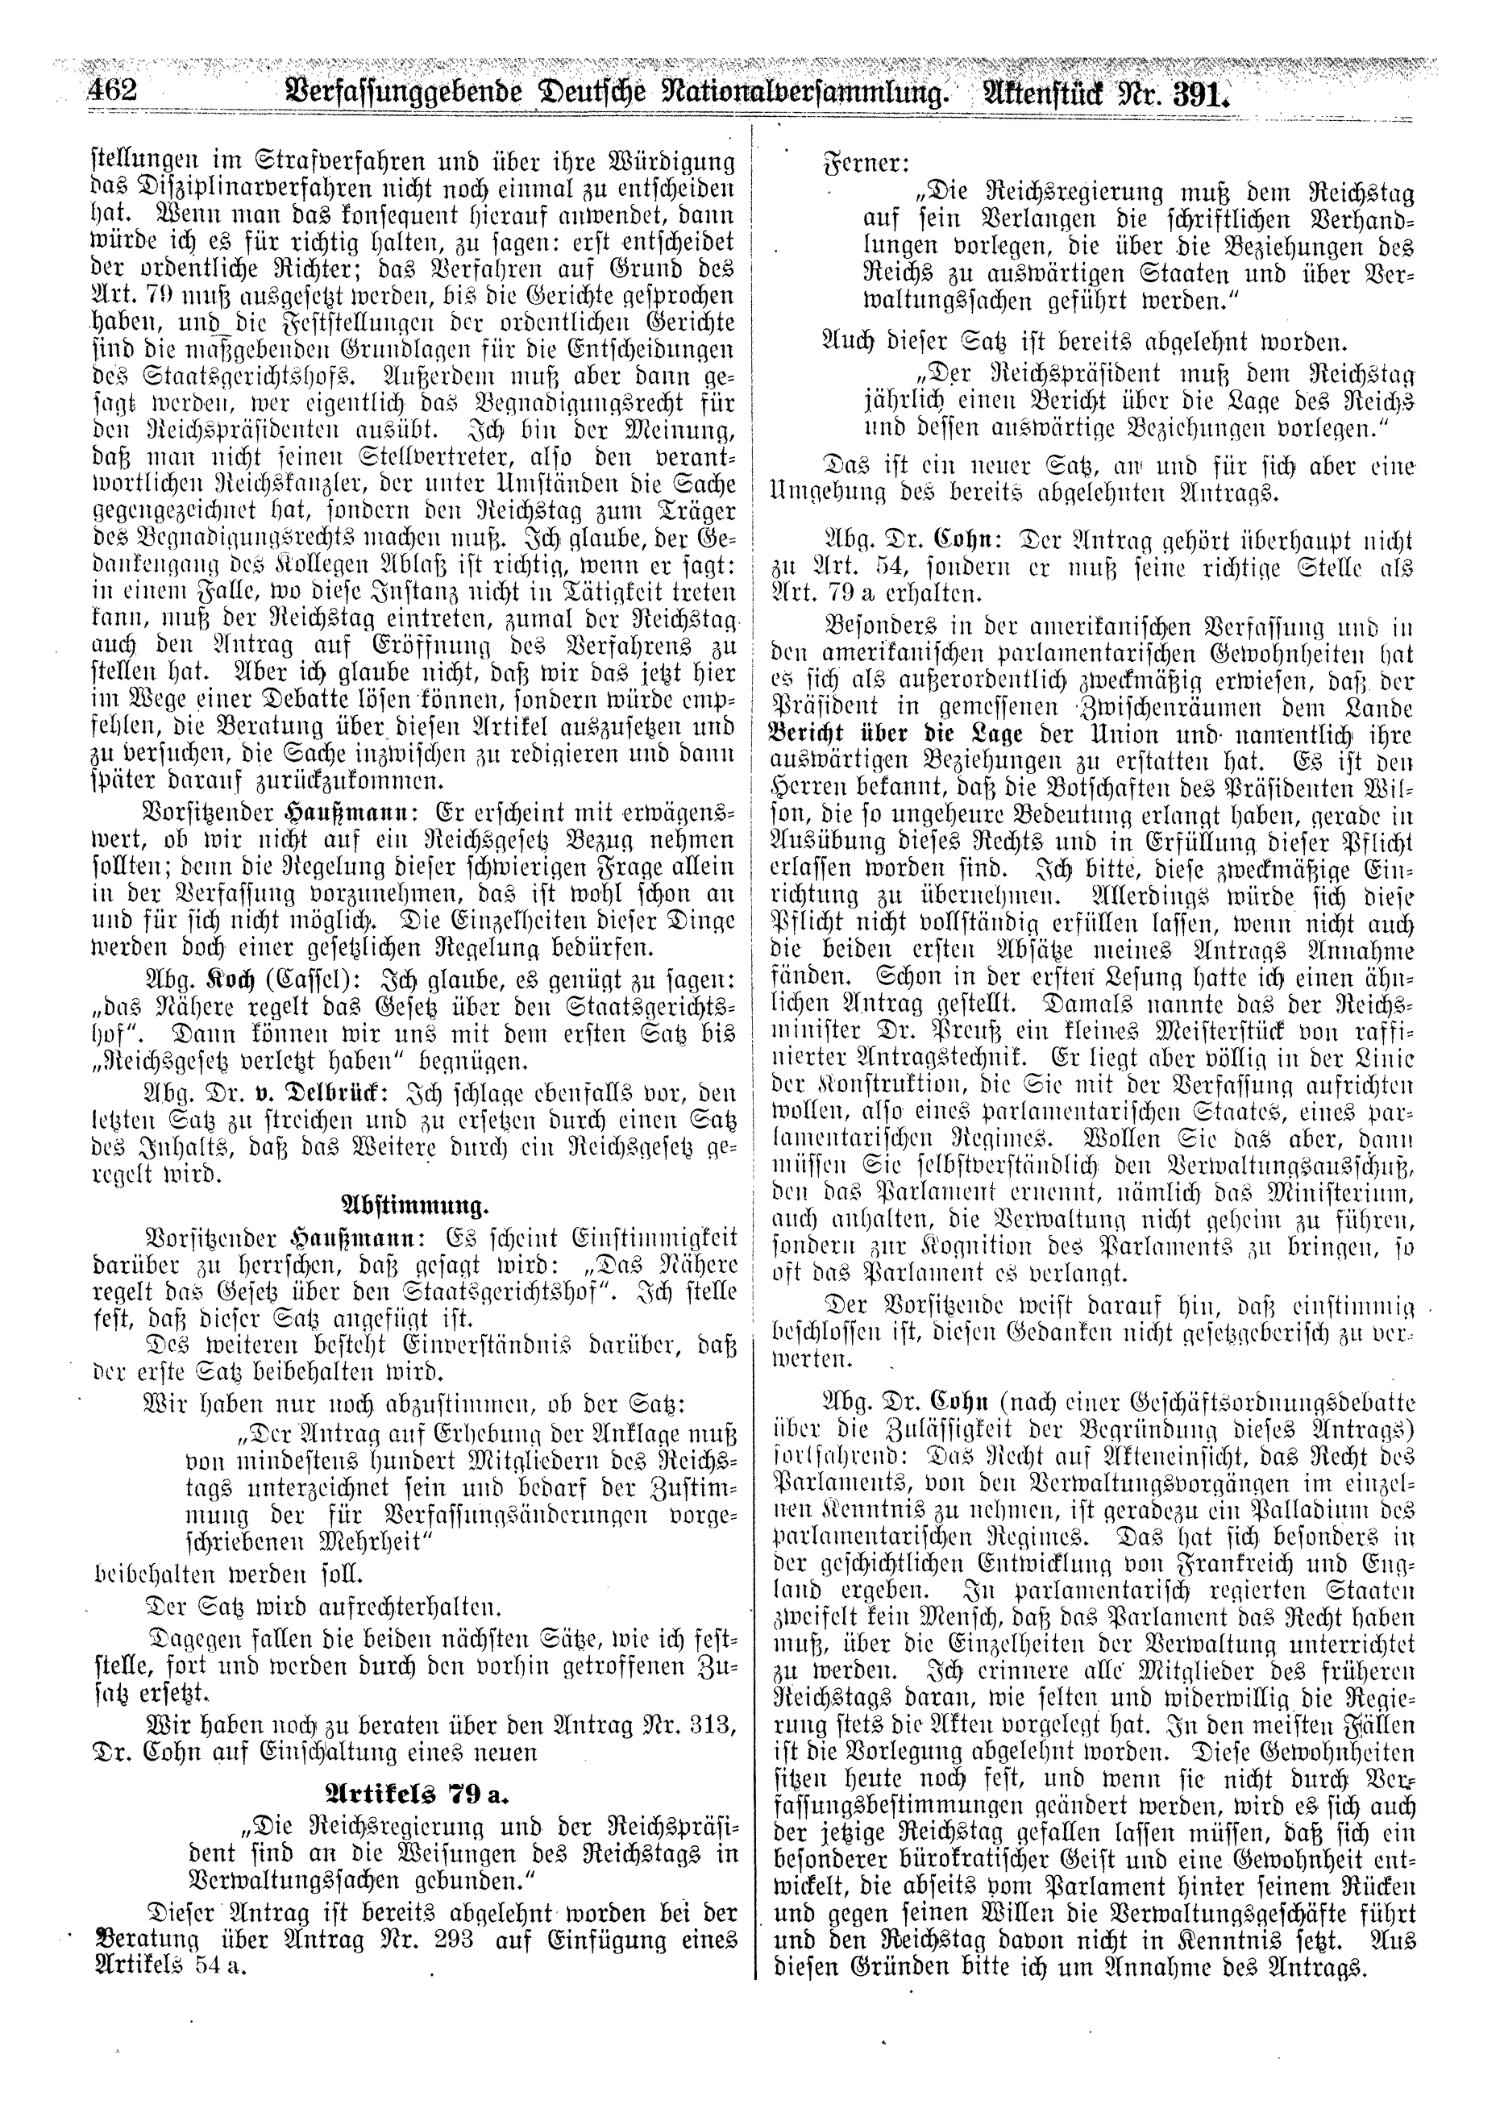 Scan of page 462